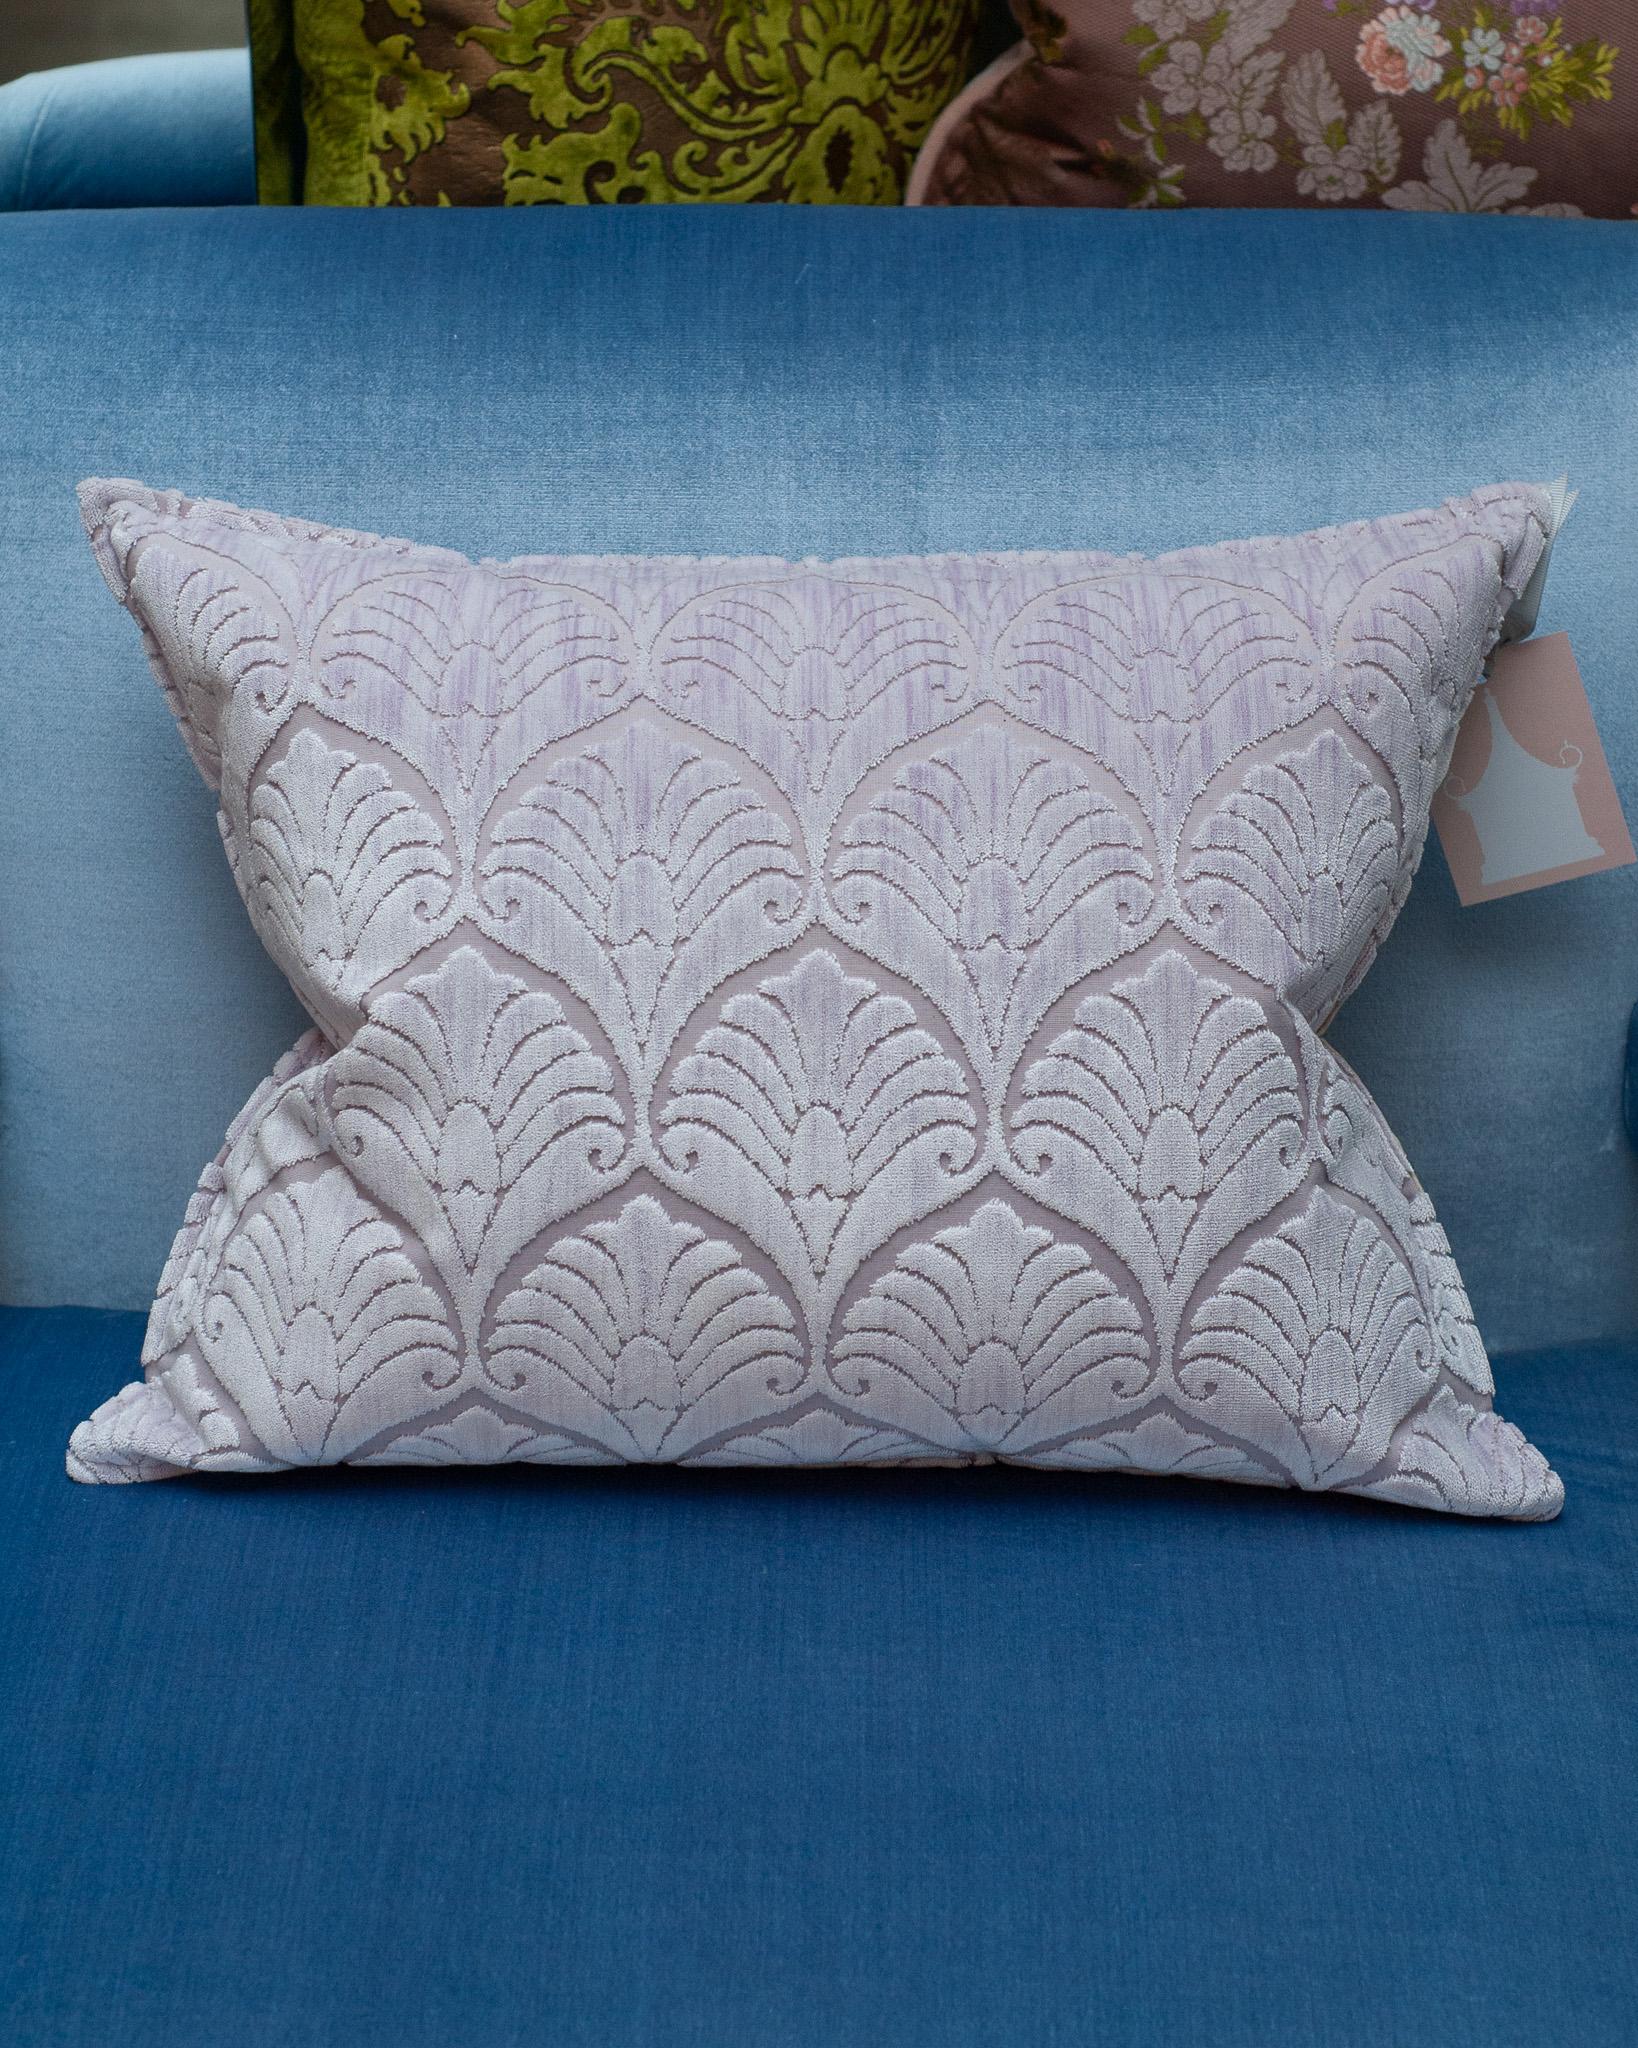 A stunning Bevilacqua Tessuti silk velvet pillow in lilac with Palmya pattern. Made in Bevilacqua's workshop for Maison Nurita, this luxurious pillow is backed in Bevilacqua creme silk moiré. Filled with the highest quality down and feather